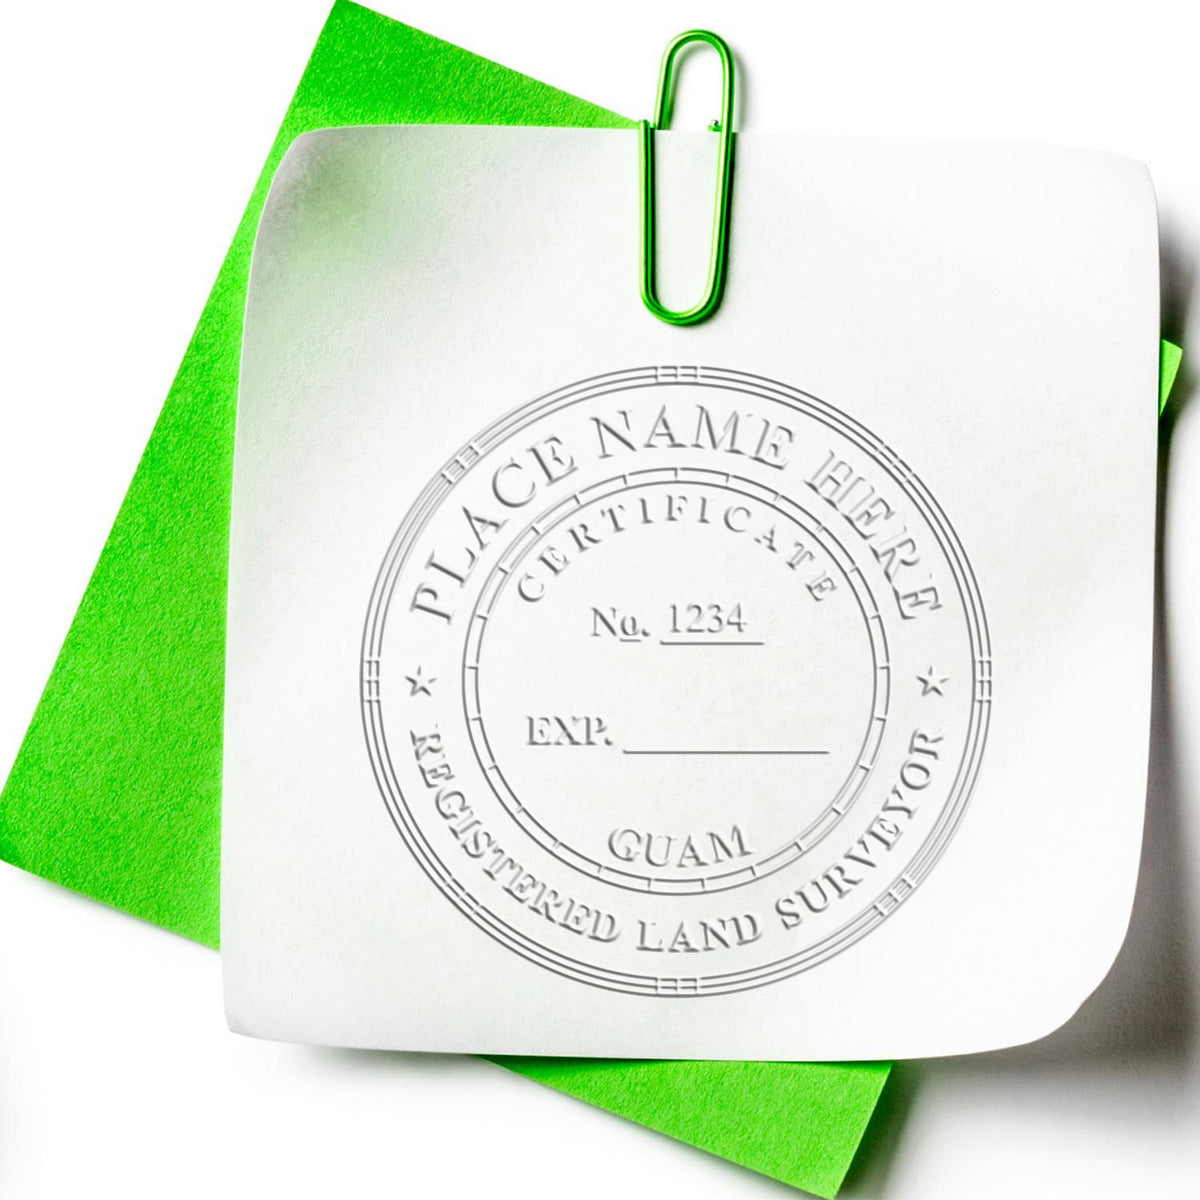 A stamped impression of the Handheld Guam Land Surveyor Seal in this stylish lifestyle photo, setting the tone for a unique and personalized product.